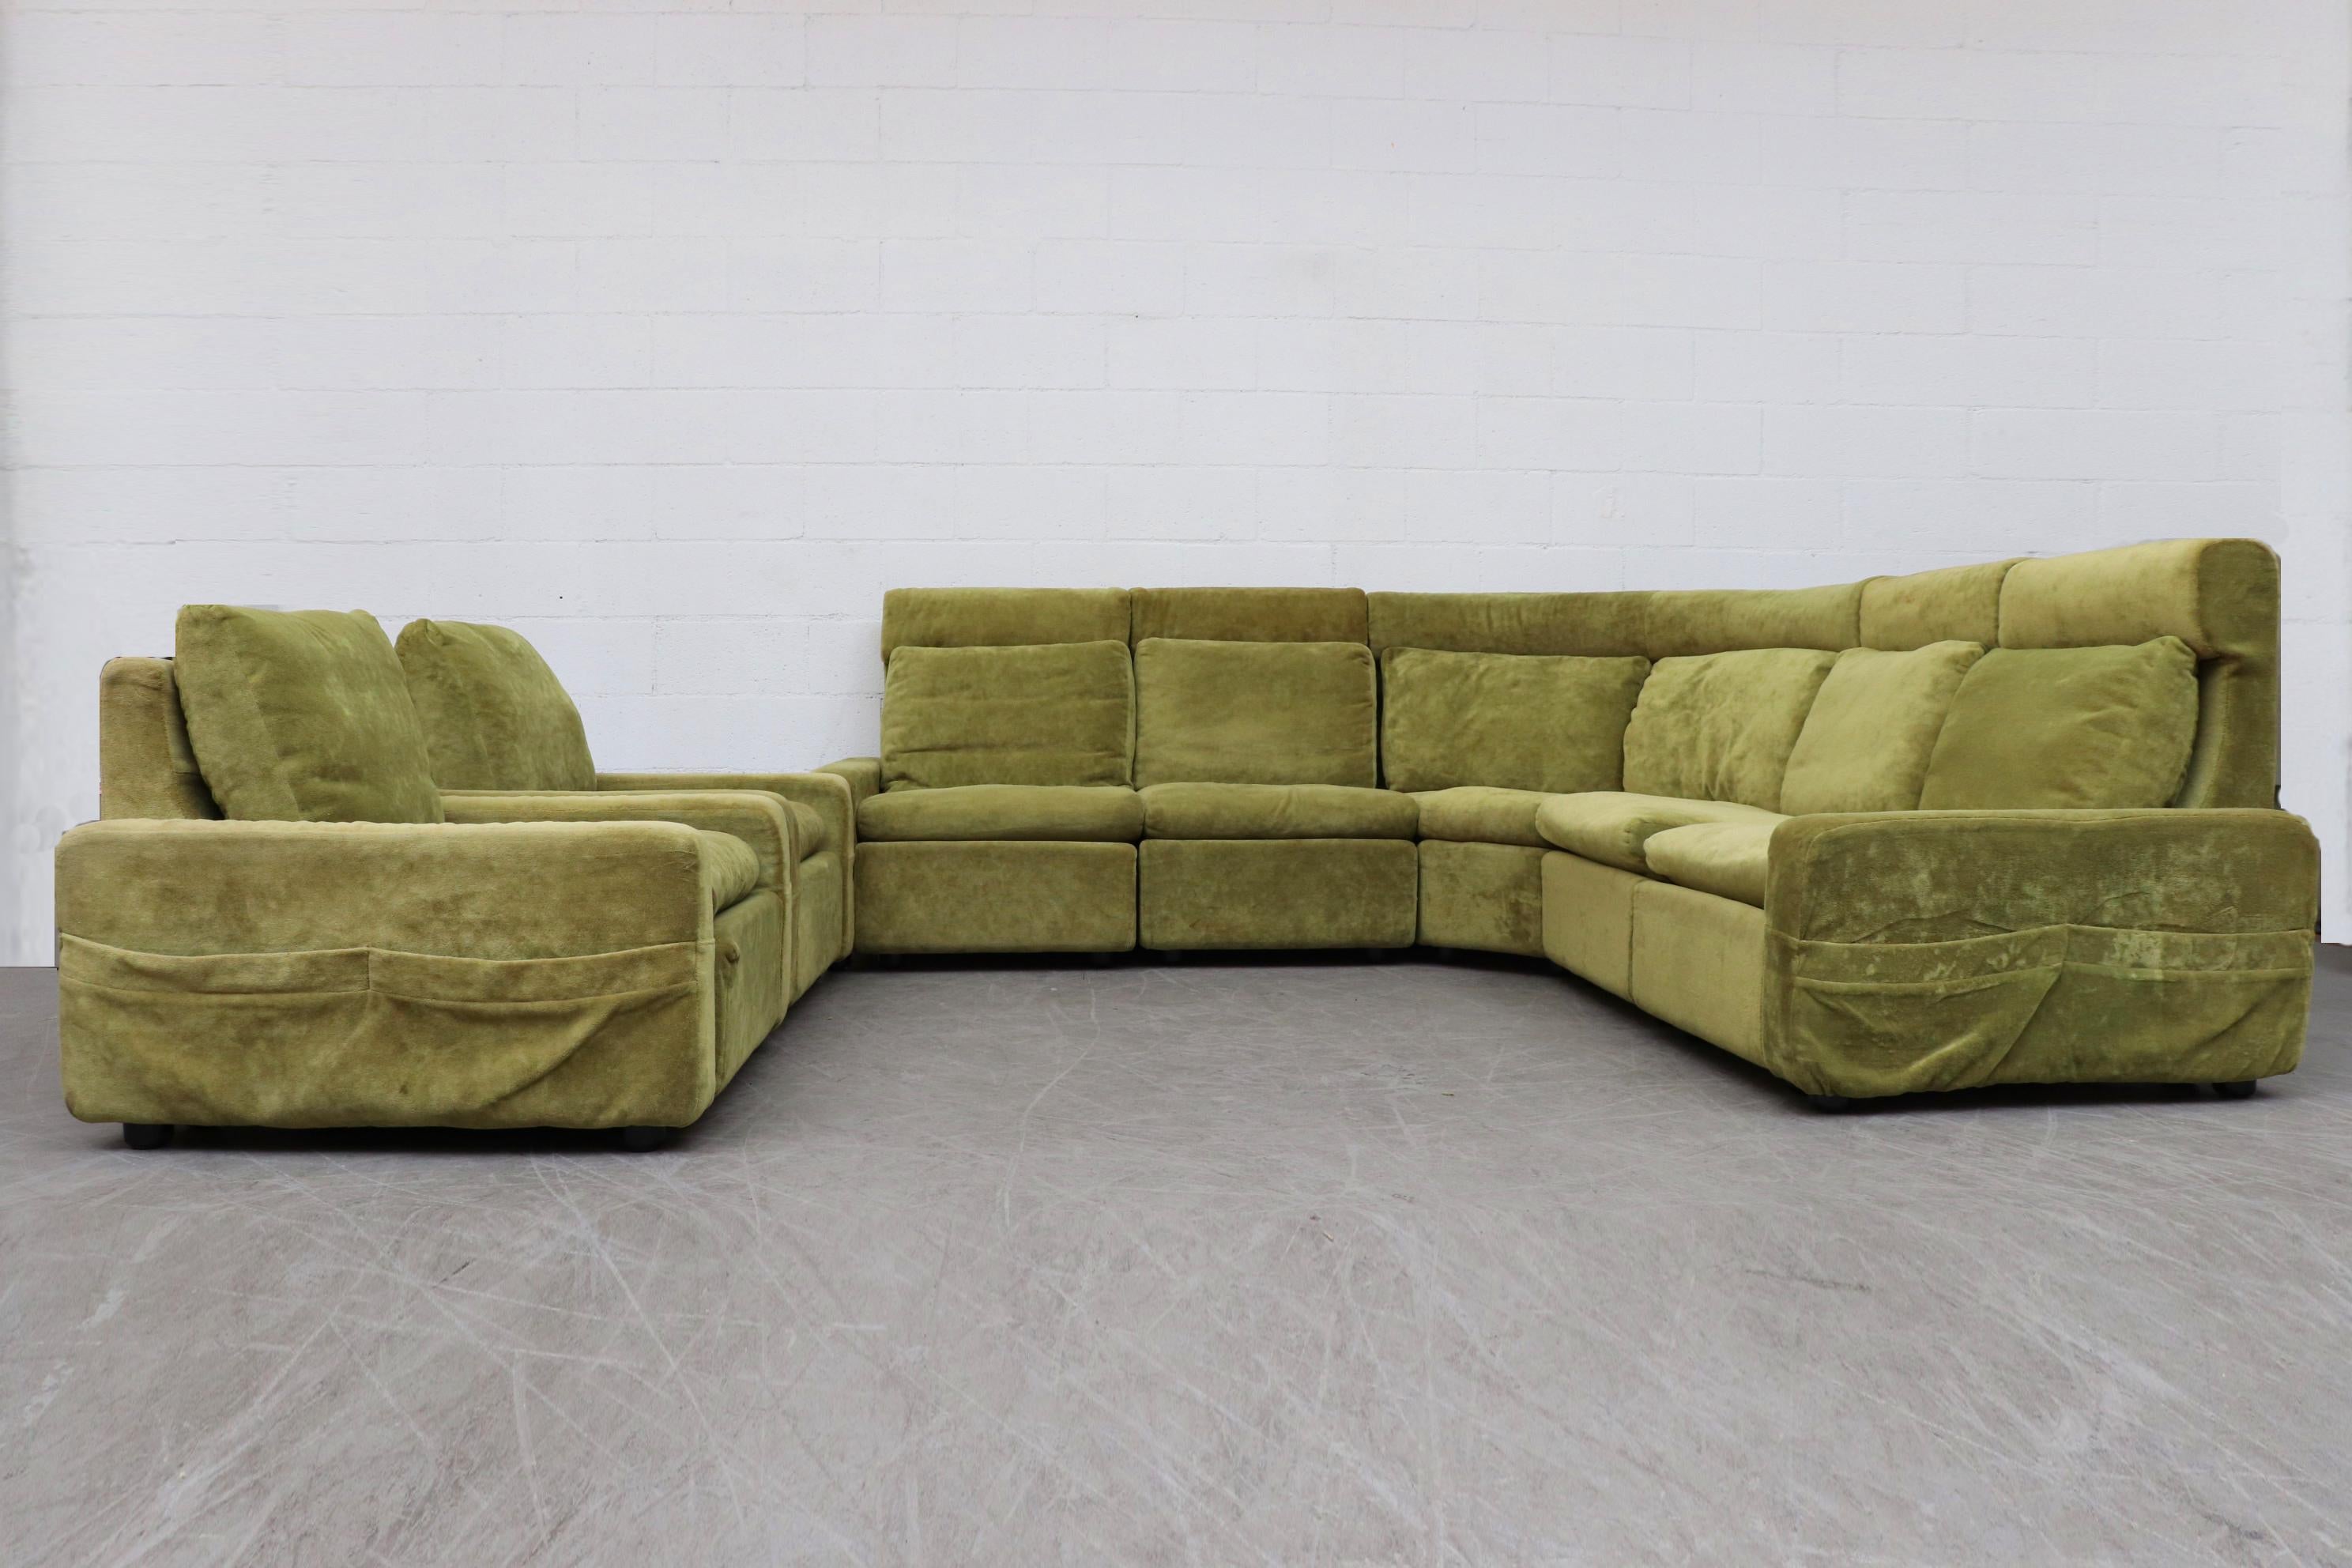 Walter knoll modular high back green sectional sofa. Fun avocado colored original upholstery with terry-cloth like texture. Sections can be linked together with metal fastens. End sections feature magazine pocket storage. In original condition with